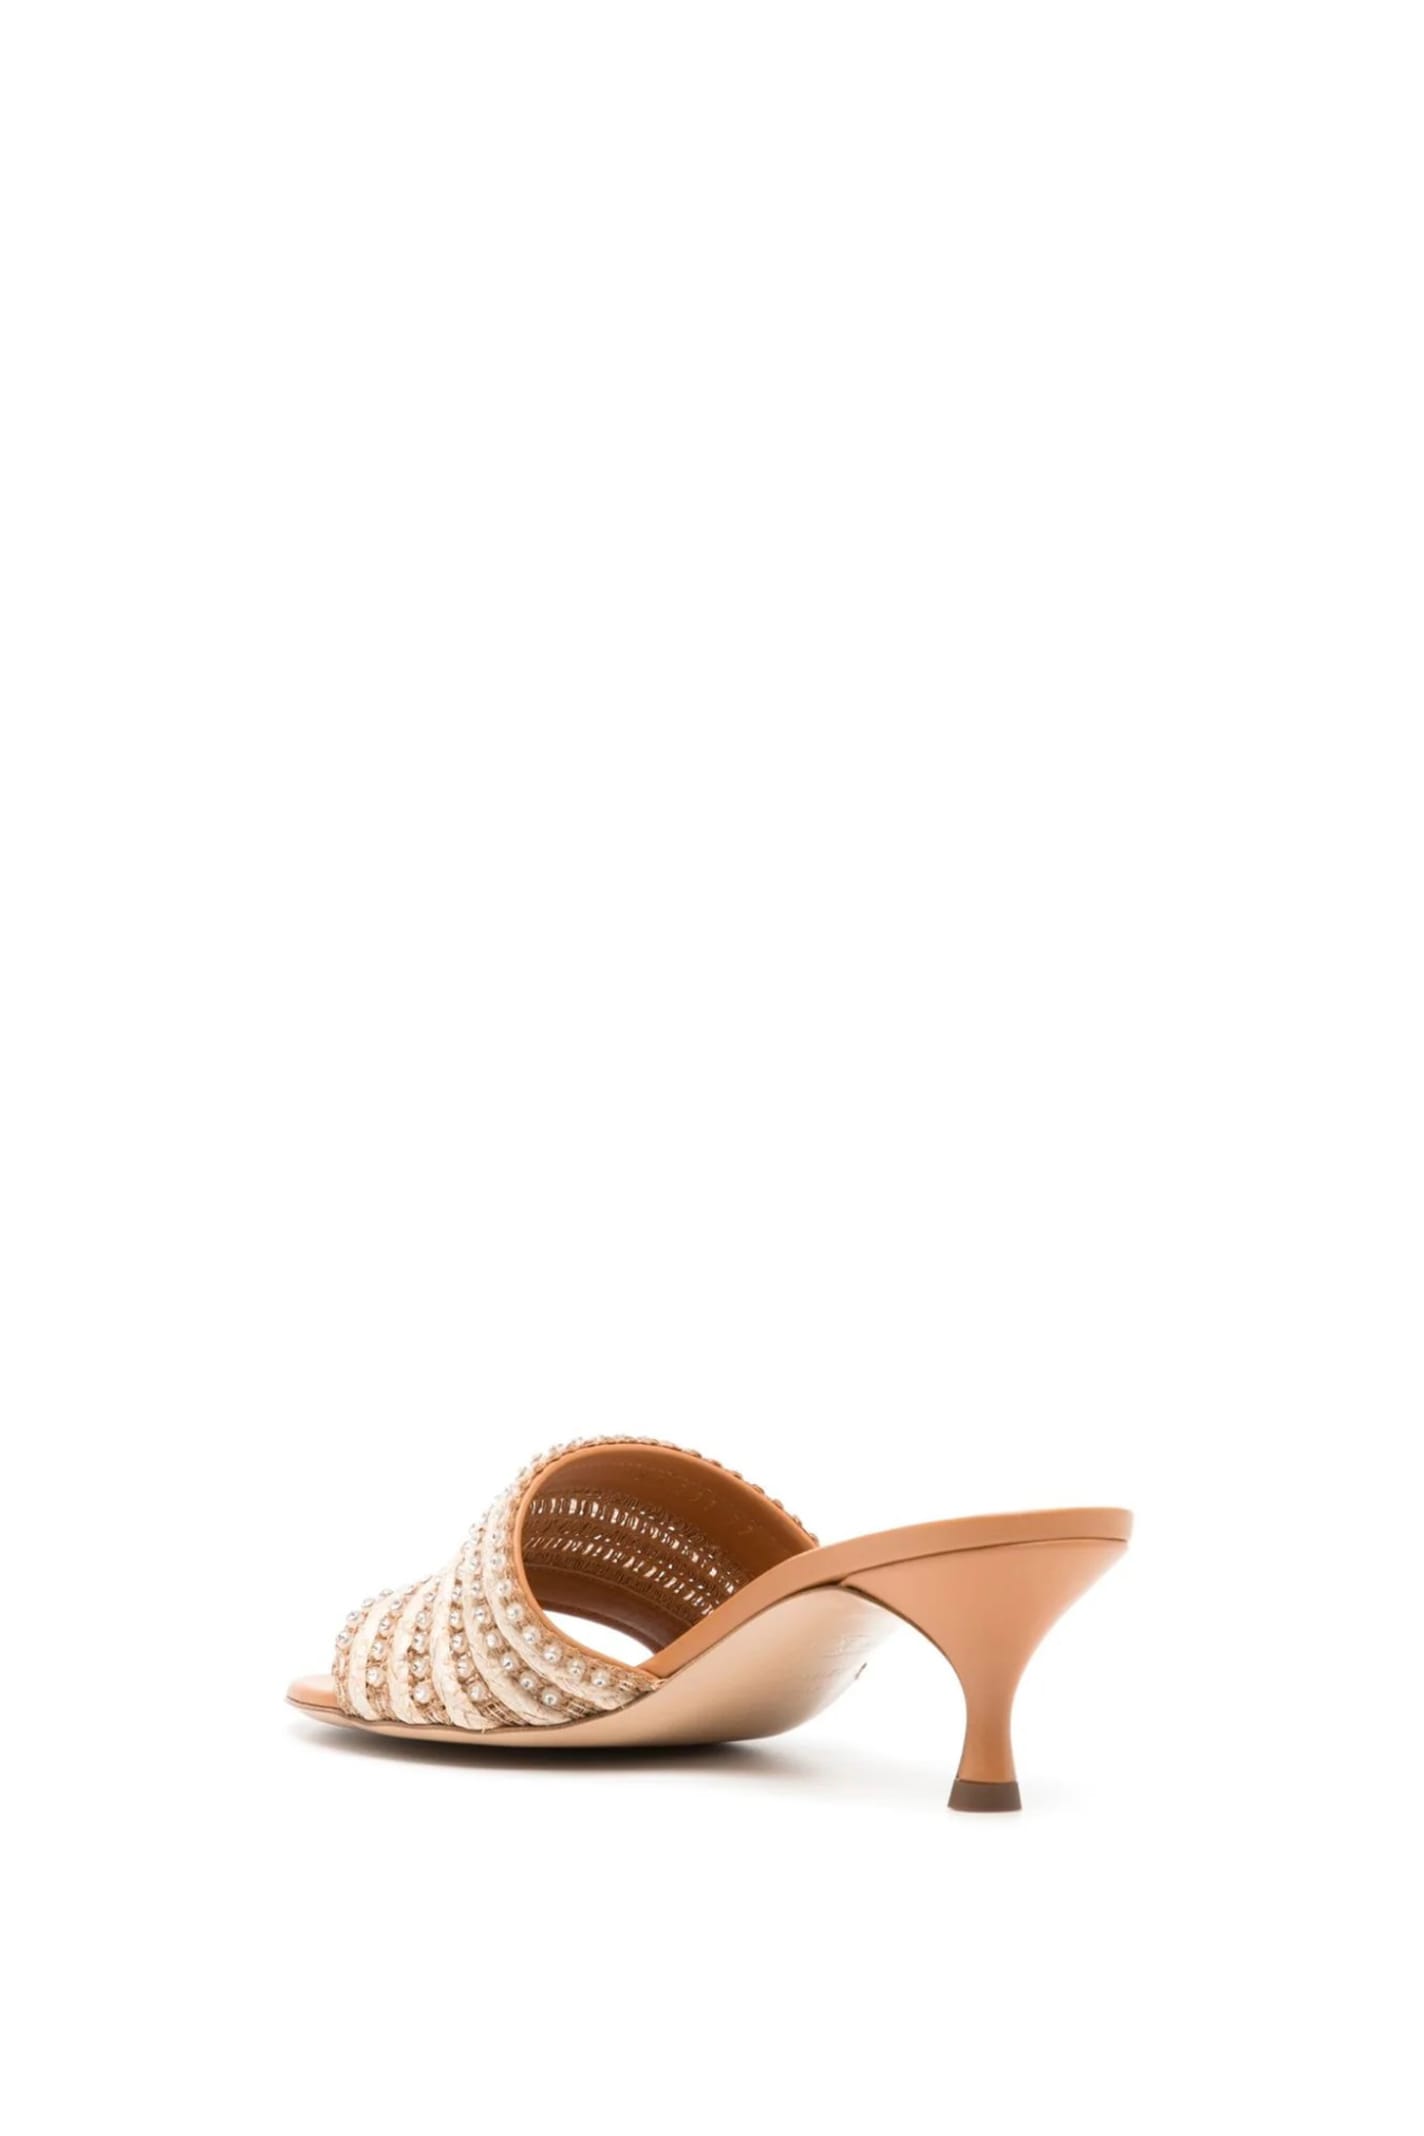 Shop Casadei Shoes With Heel In Pink